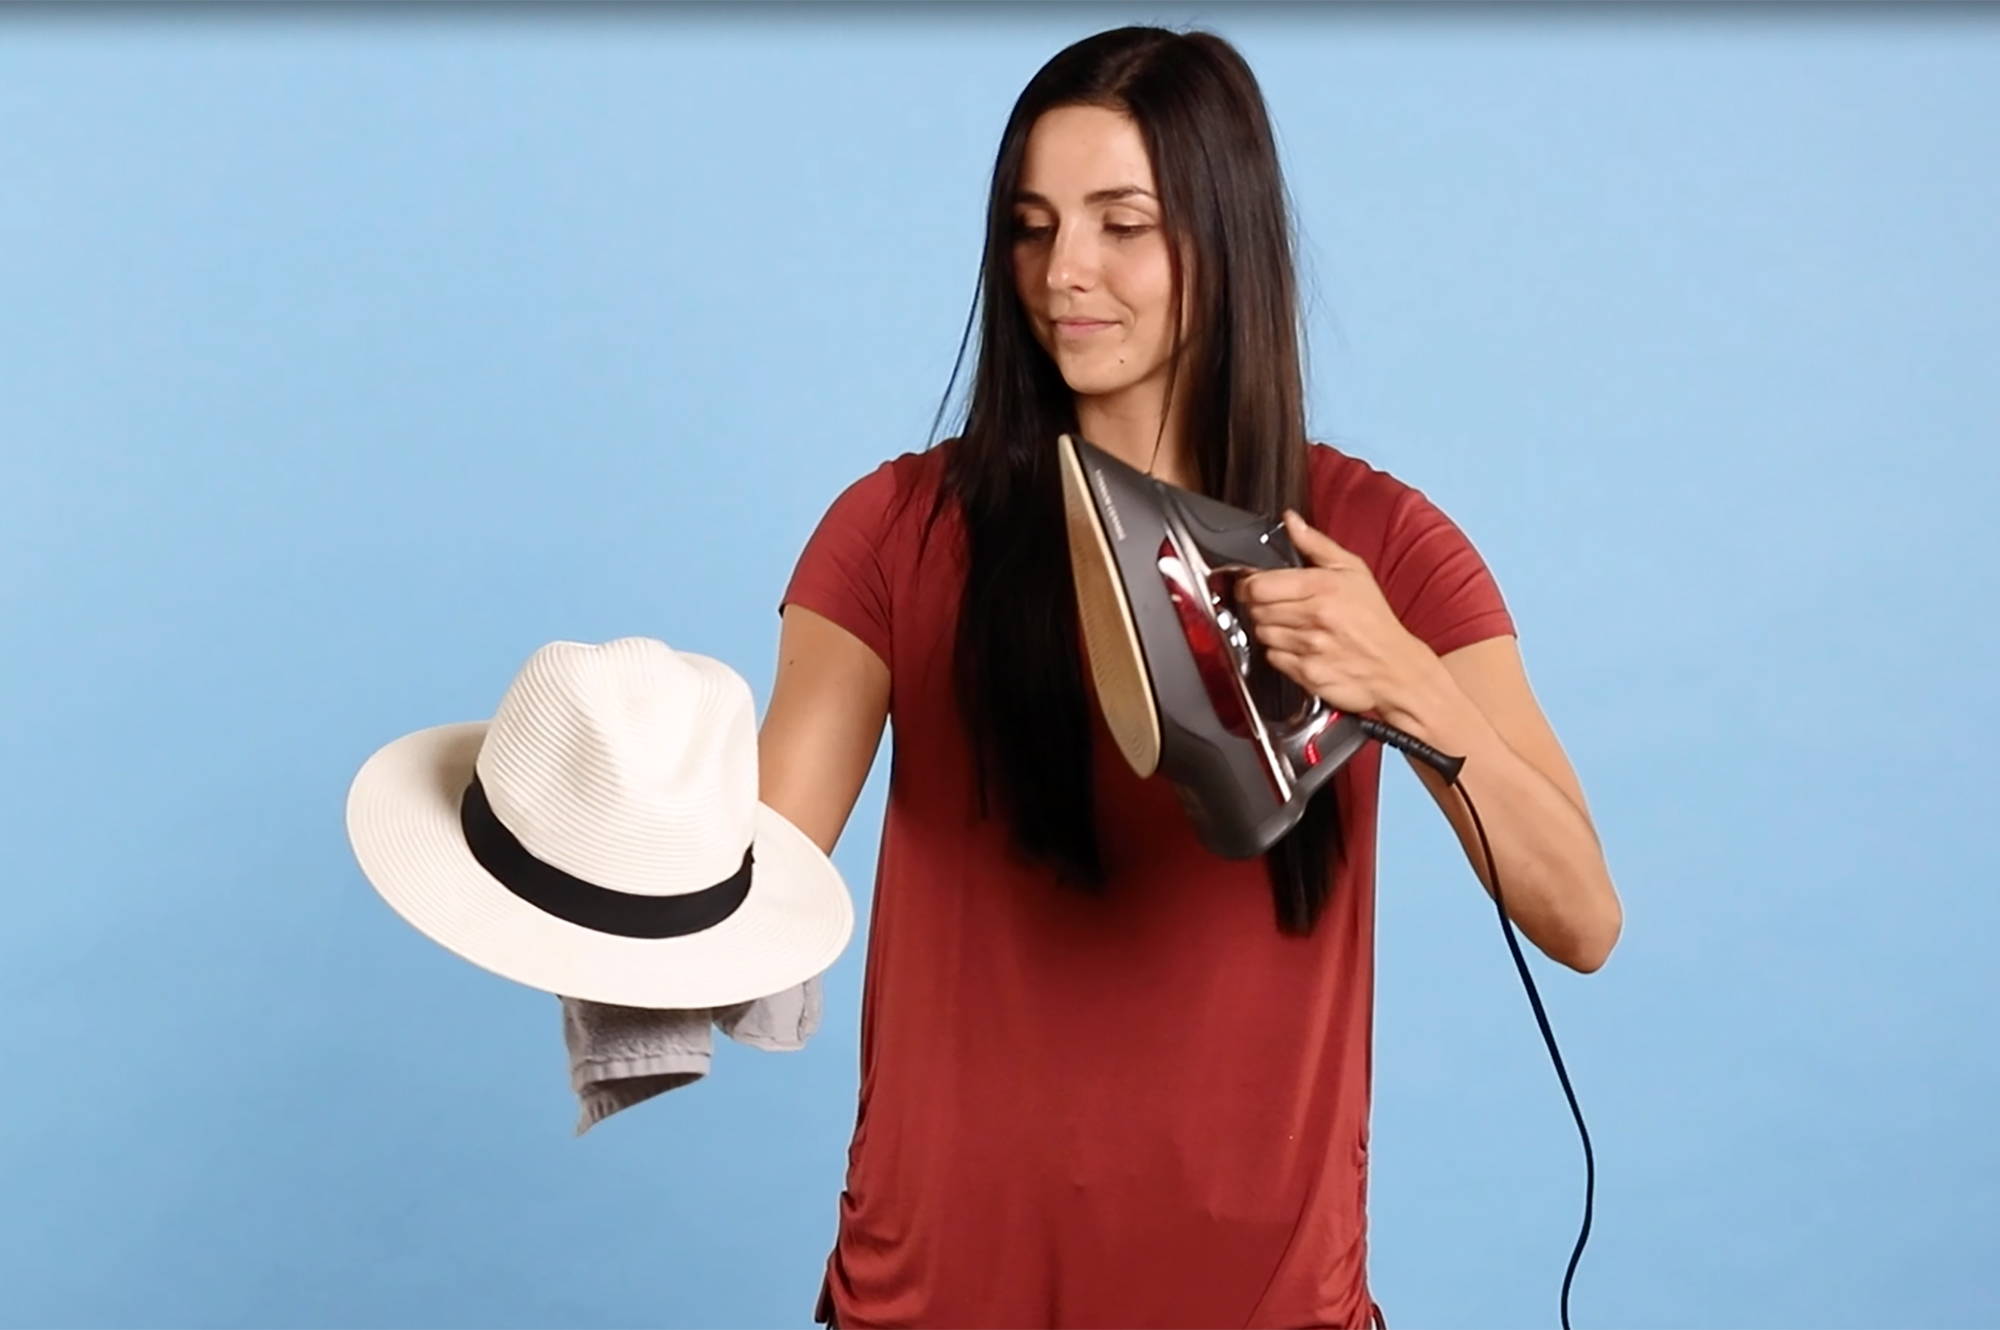 How to Pack a Sun Hat for Travel